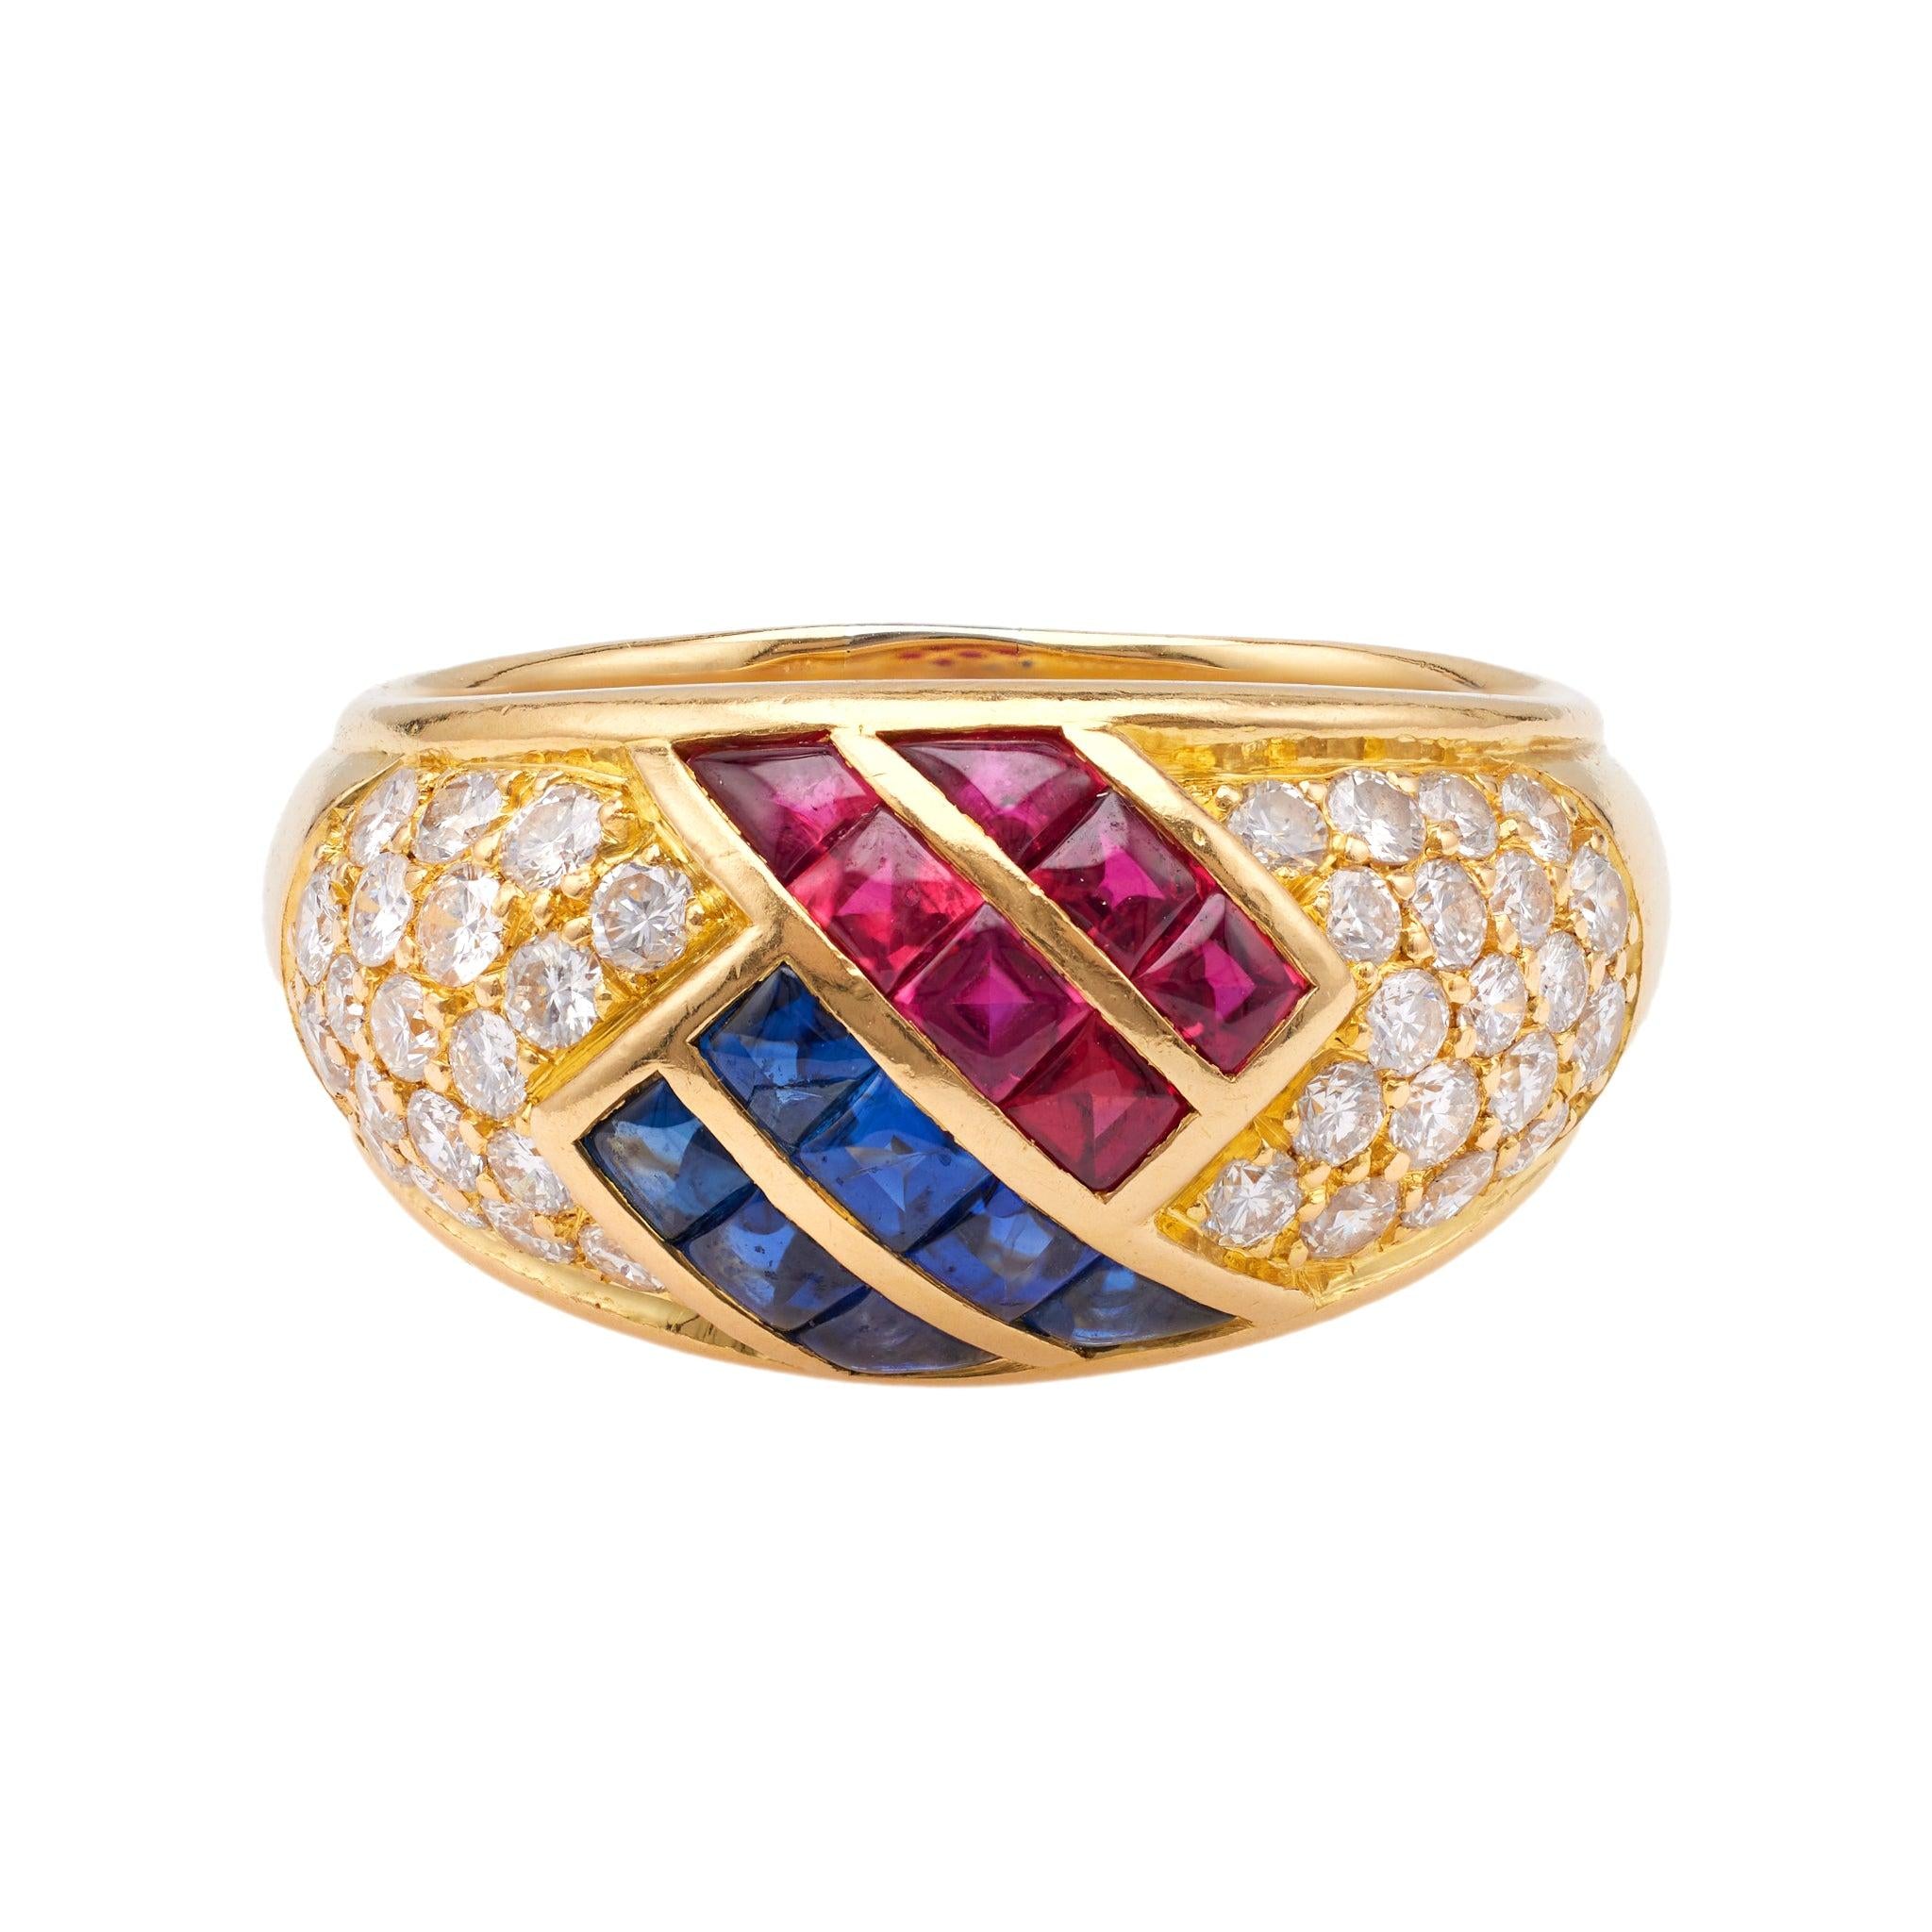 Vintage Mauboussin French Ruby, Sapphire, and Diamond 18k Yellow Gold Dome Ring  Mauboussin   